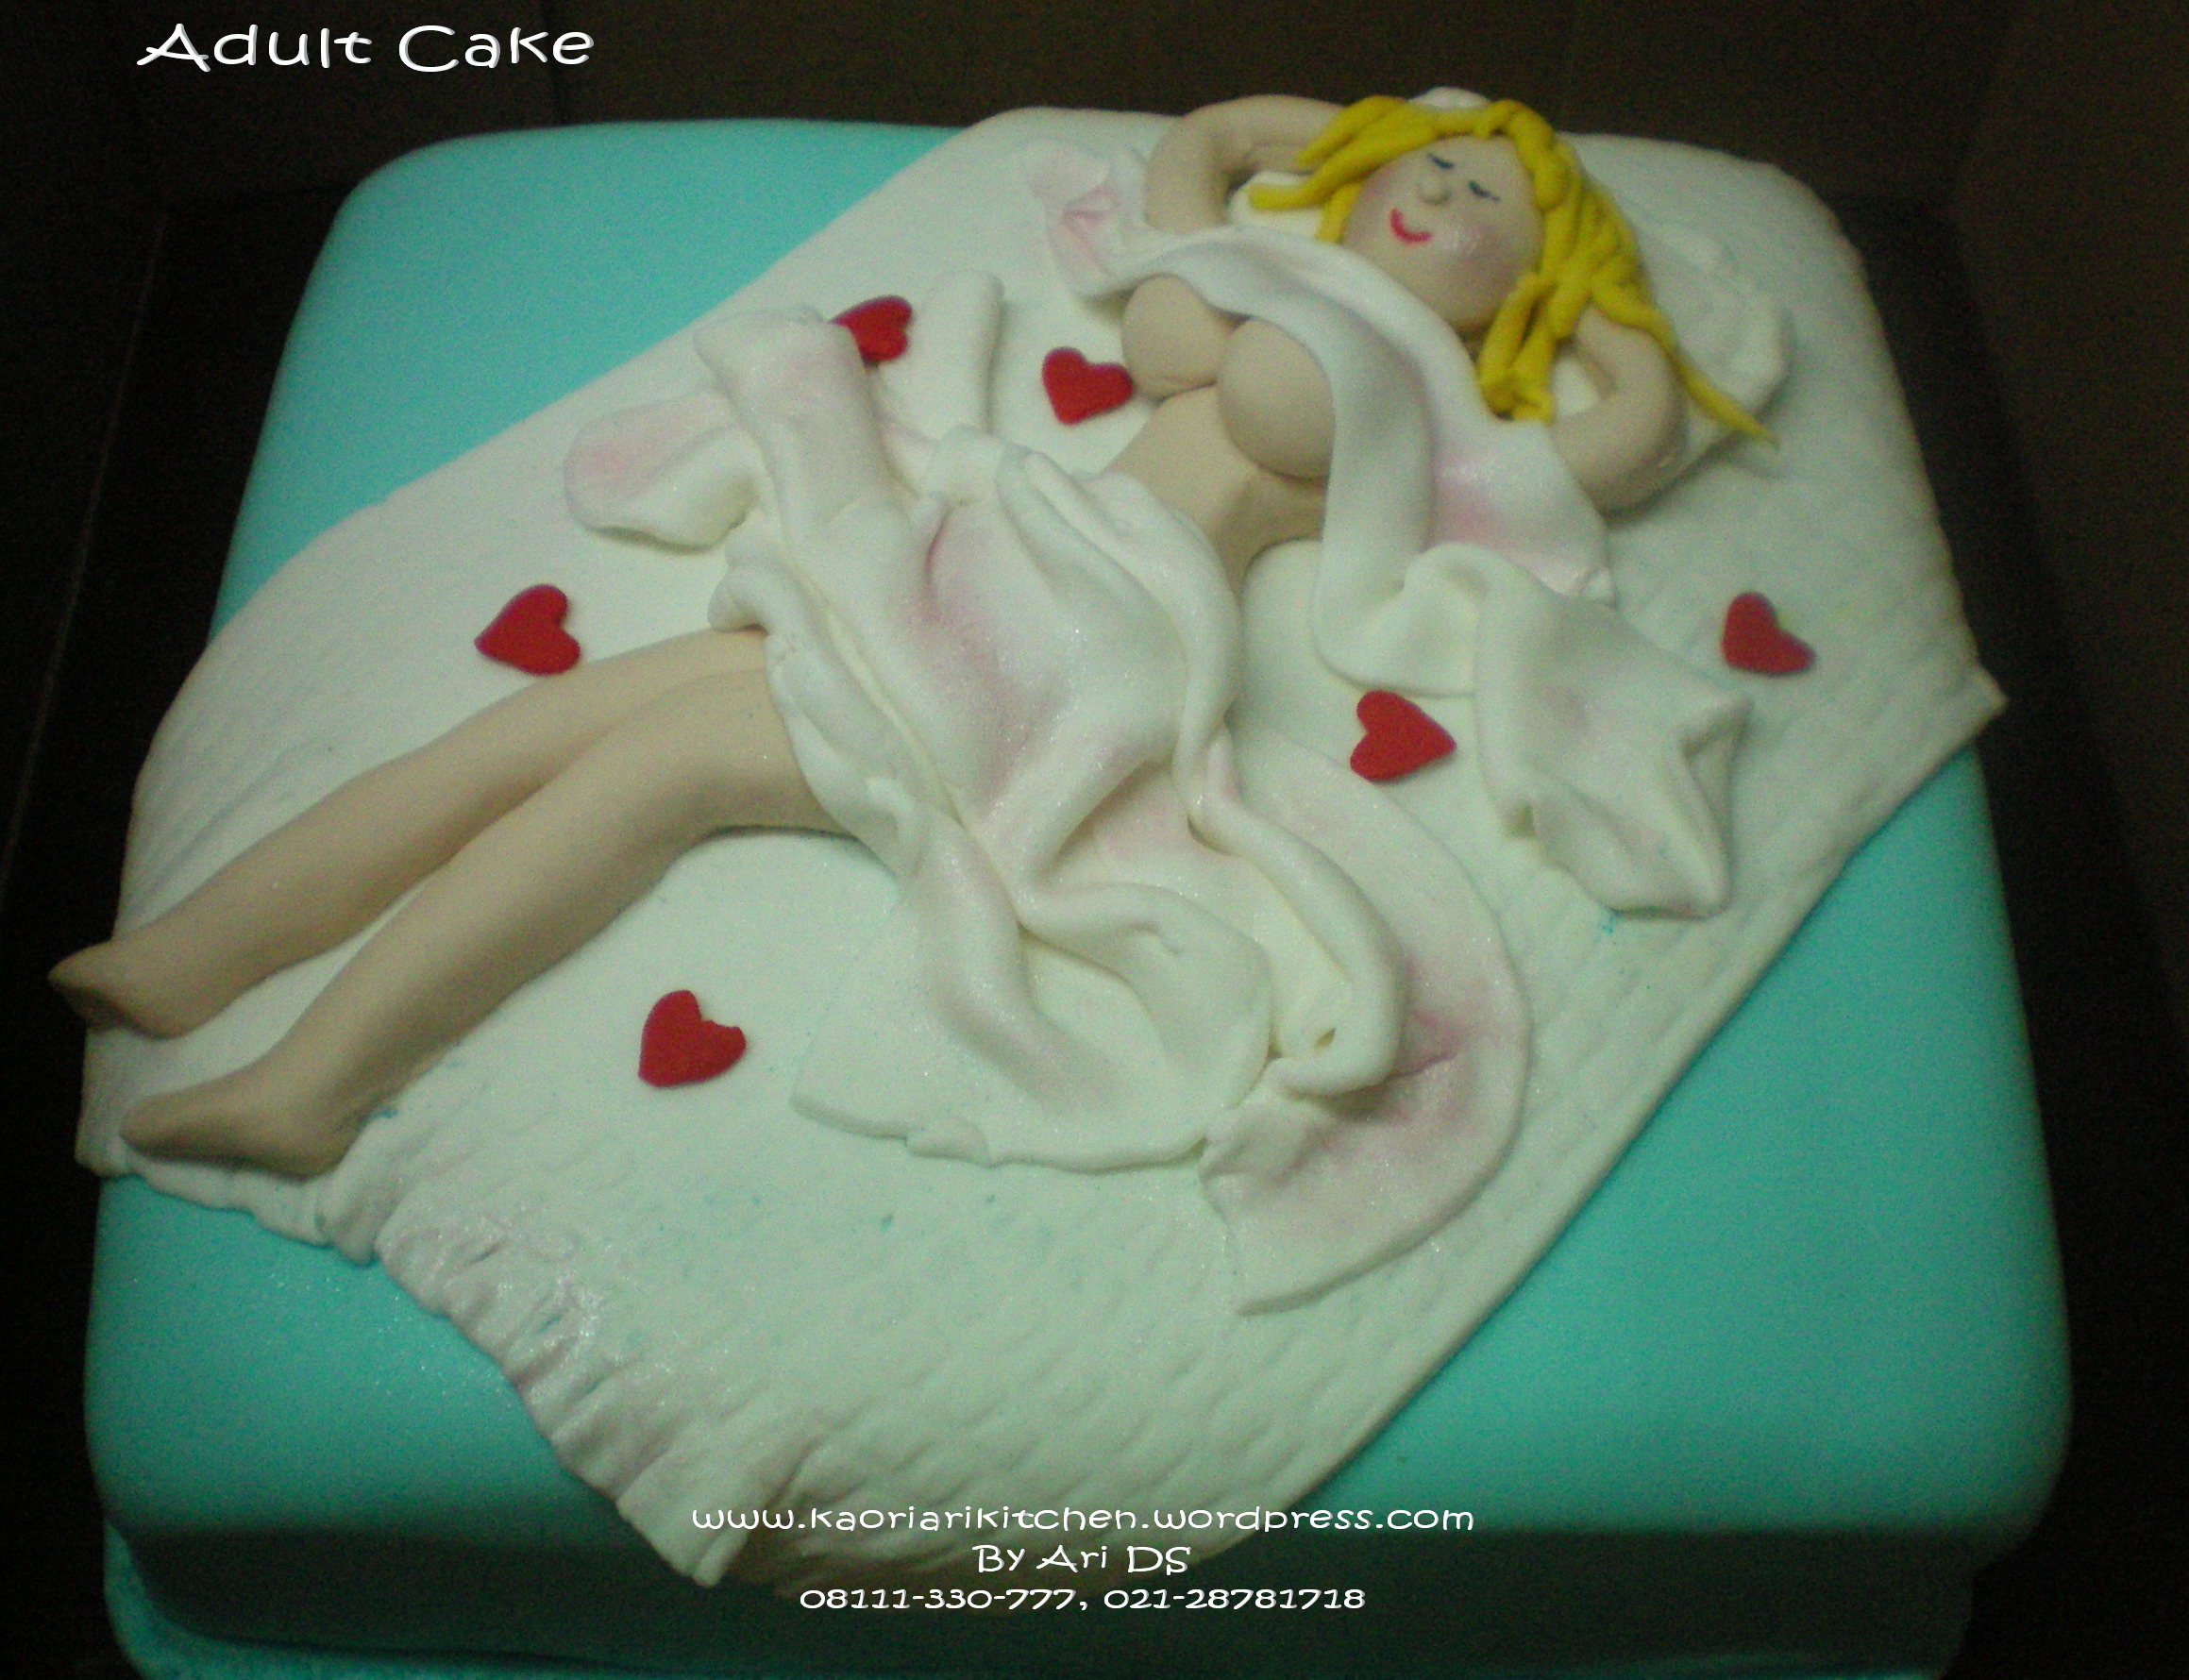 Download this Adult Cake picture